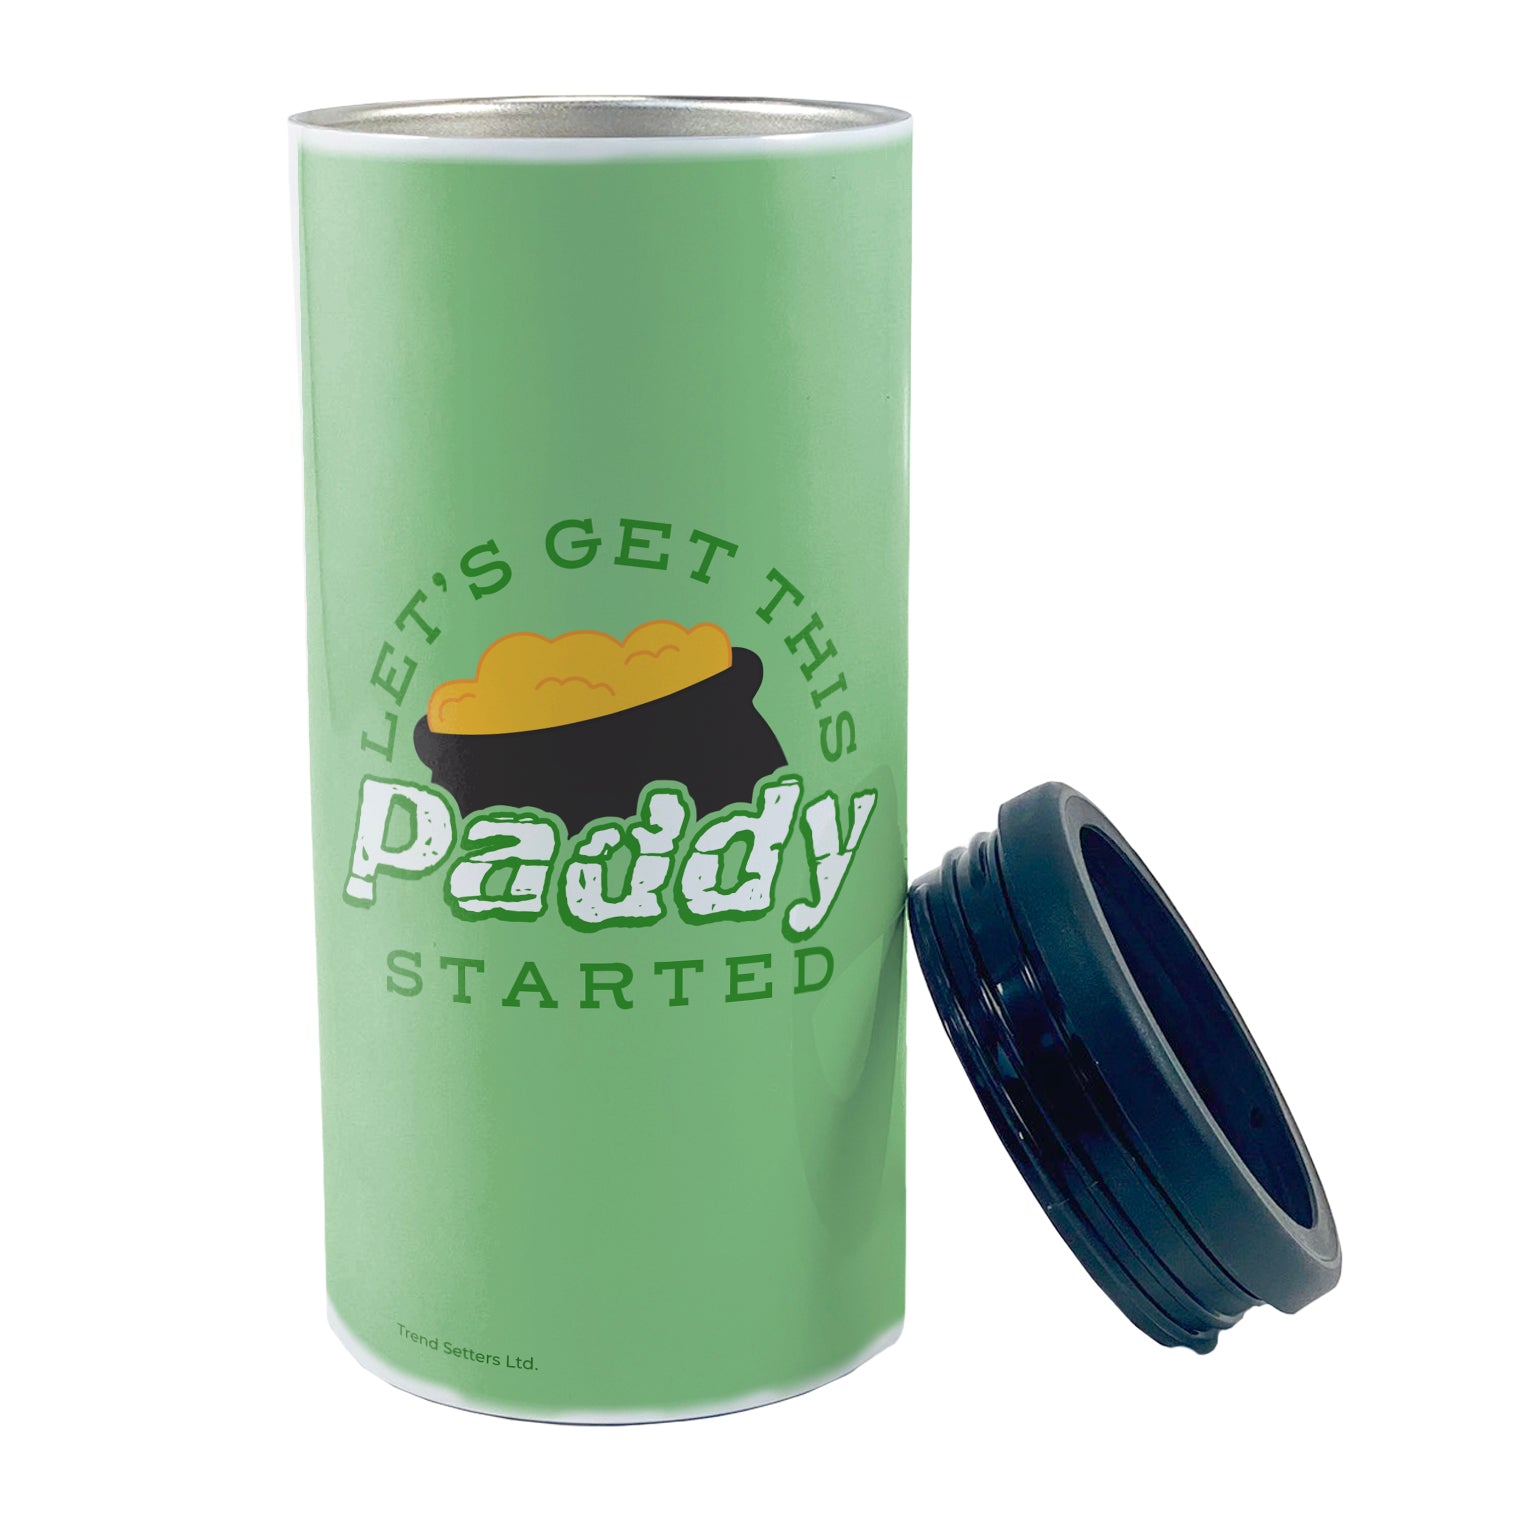 St. Patrick’s Day Collection (Let’s Get This Paddy Started) 12 Oz Slim Can Cooler